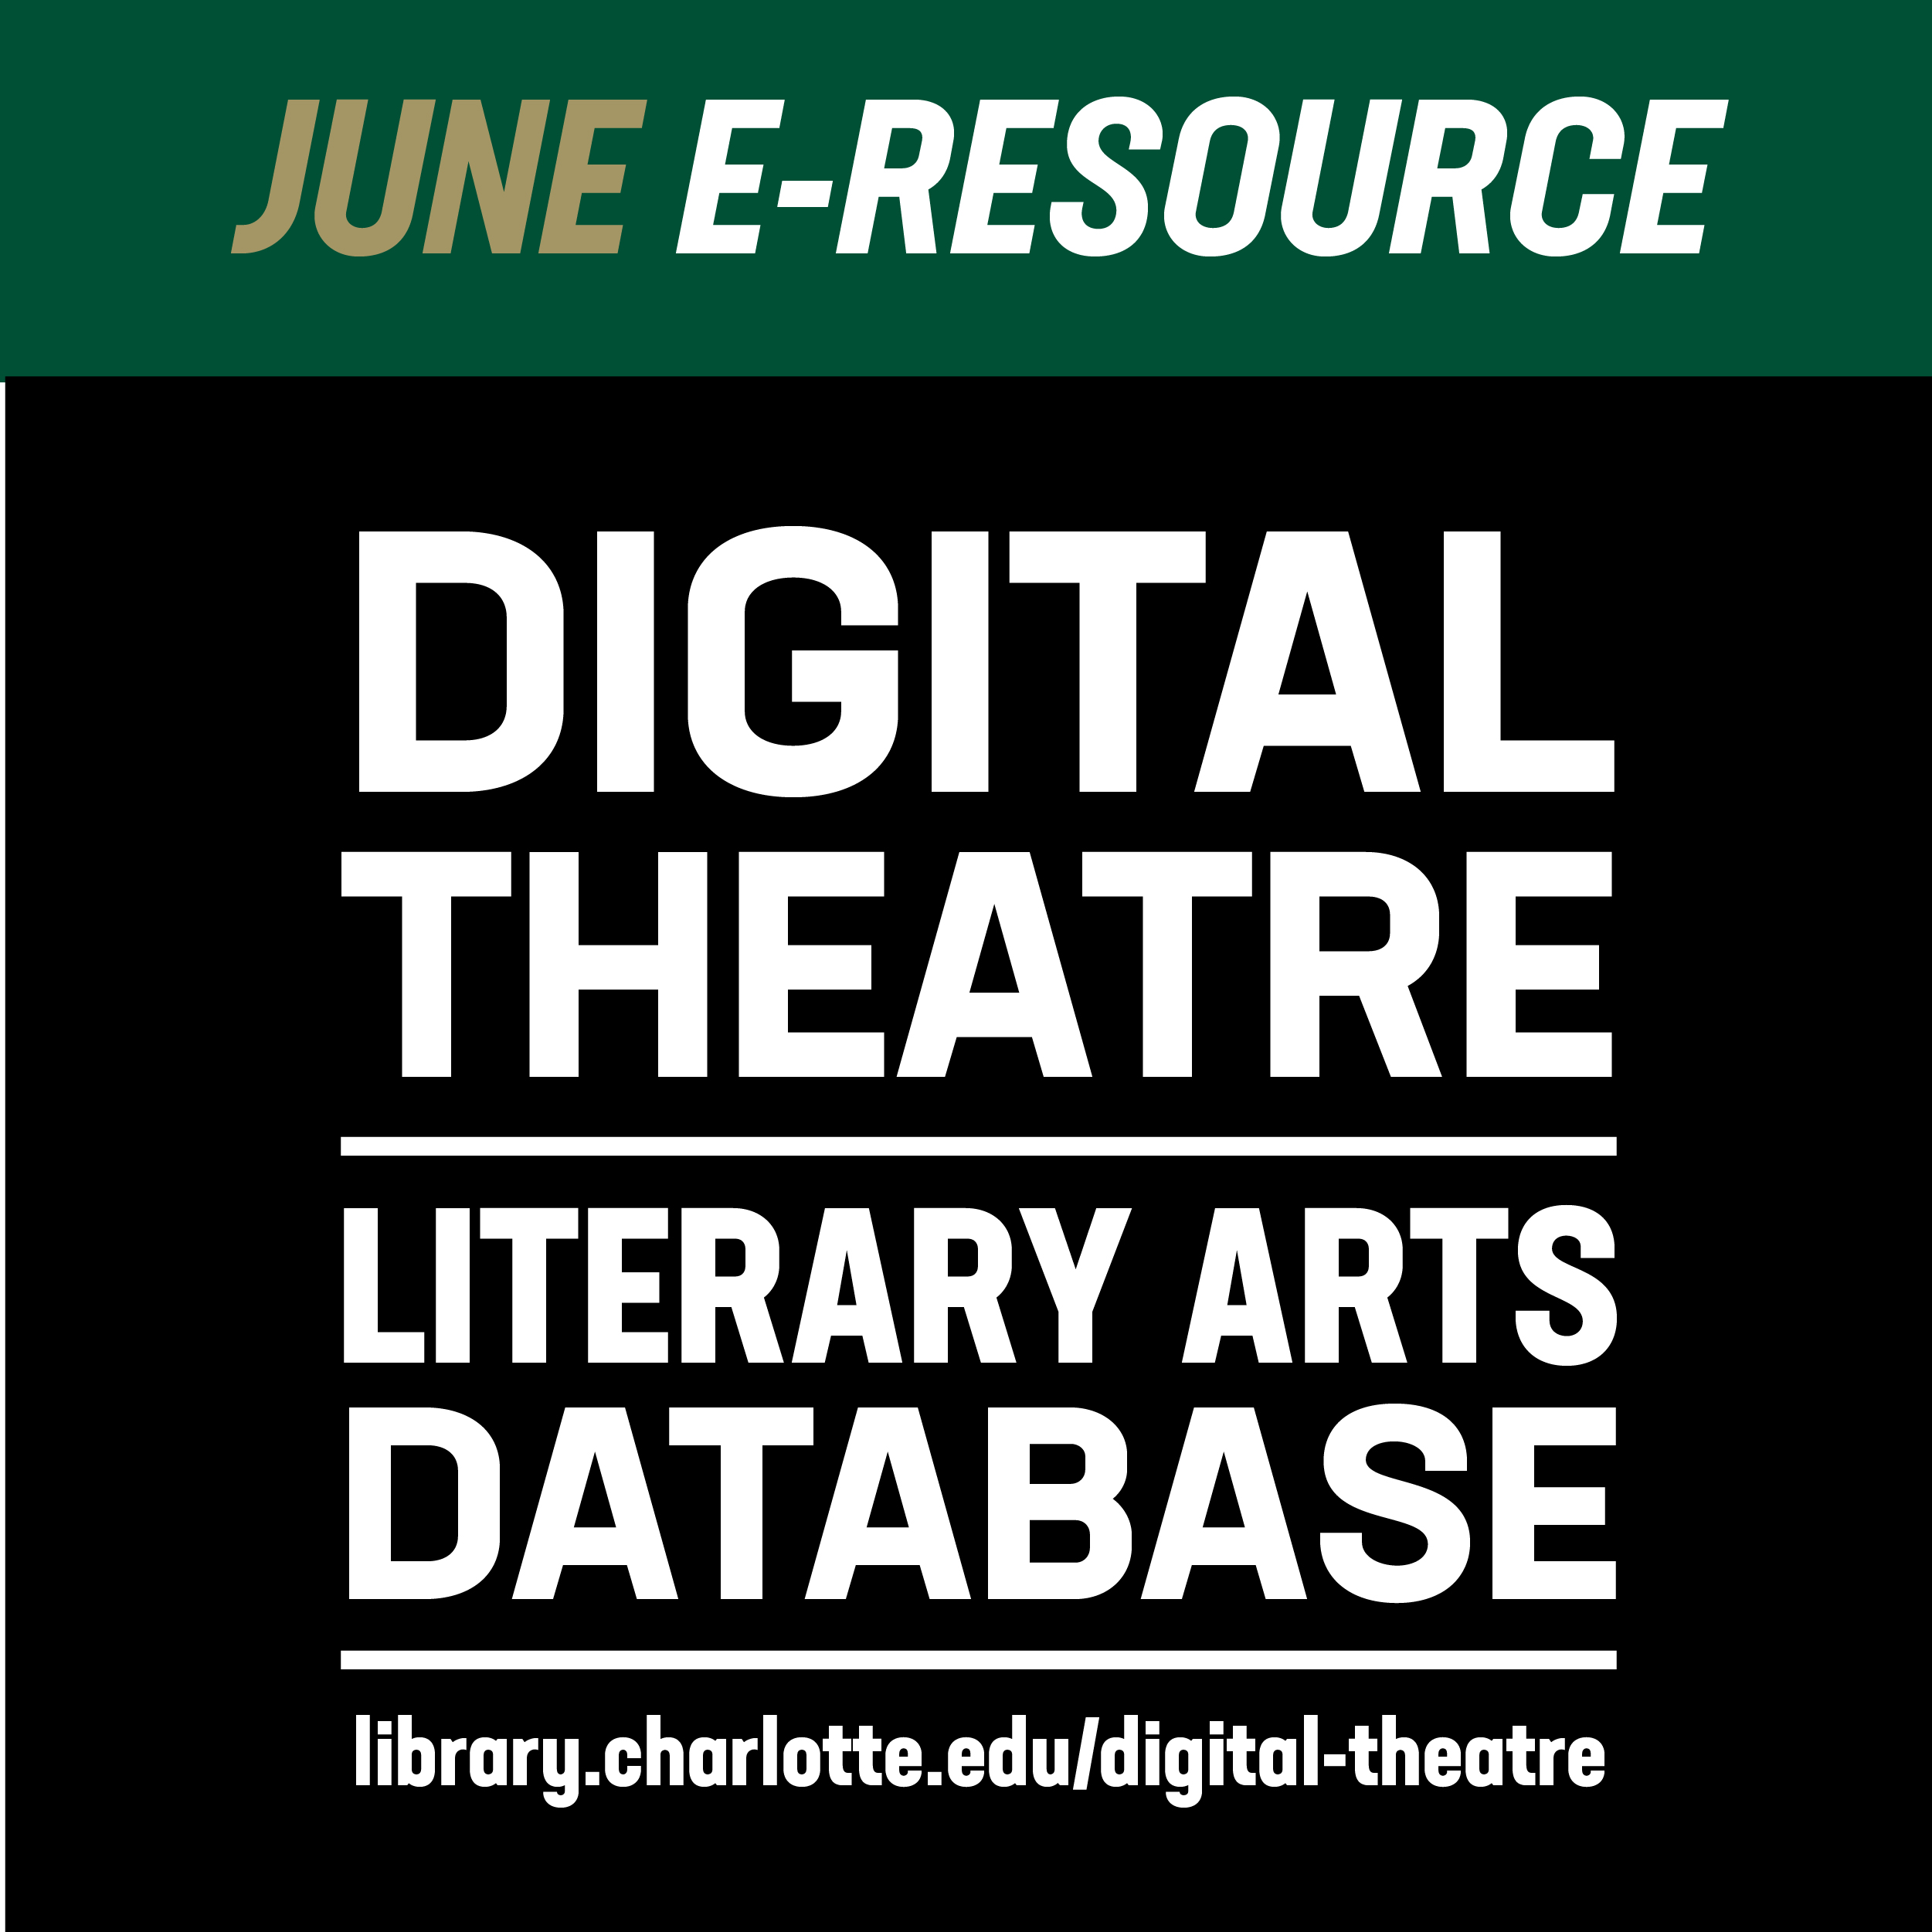 A graphic showing that the June electronic resource of the month is Digital Theatre Plus